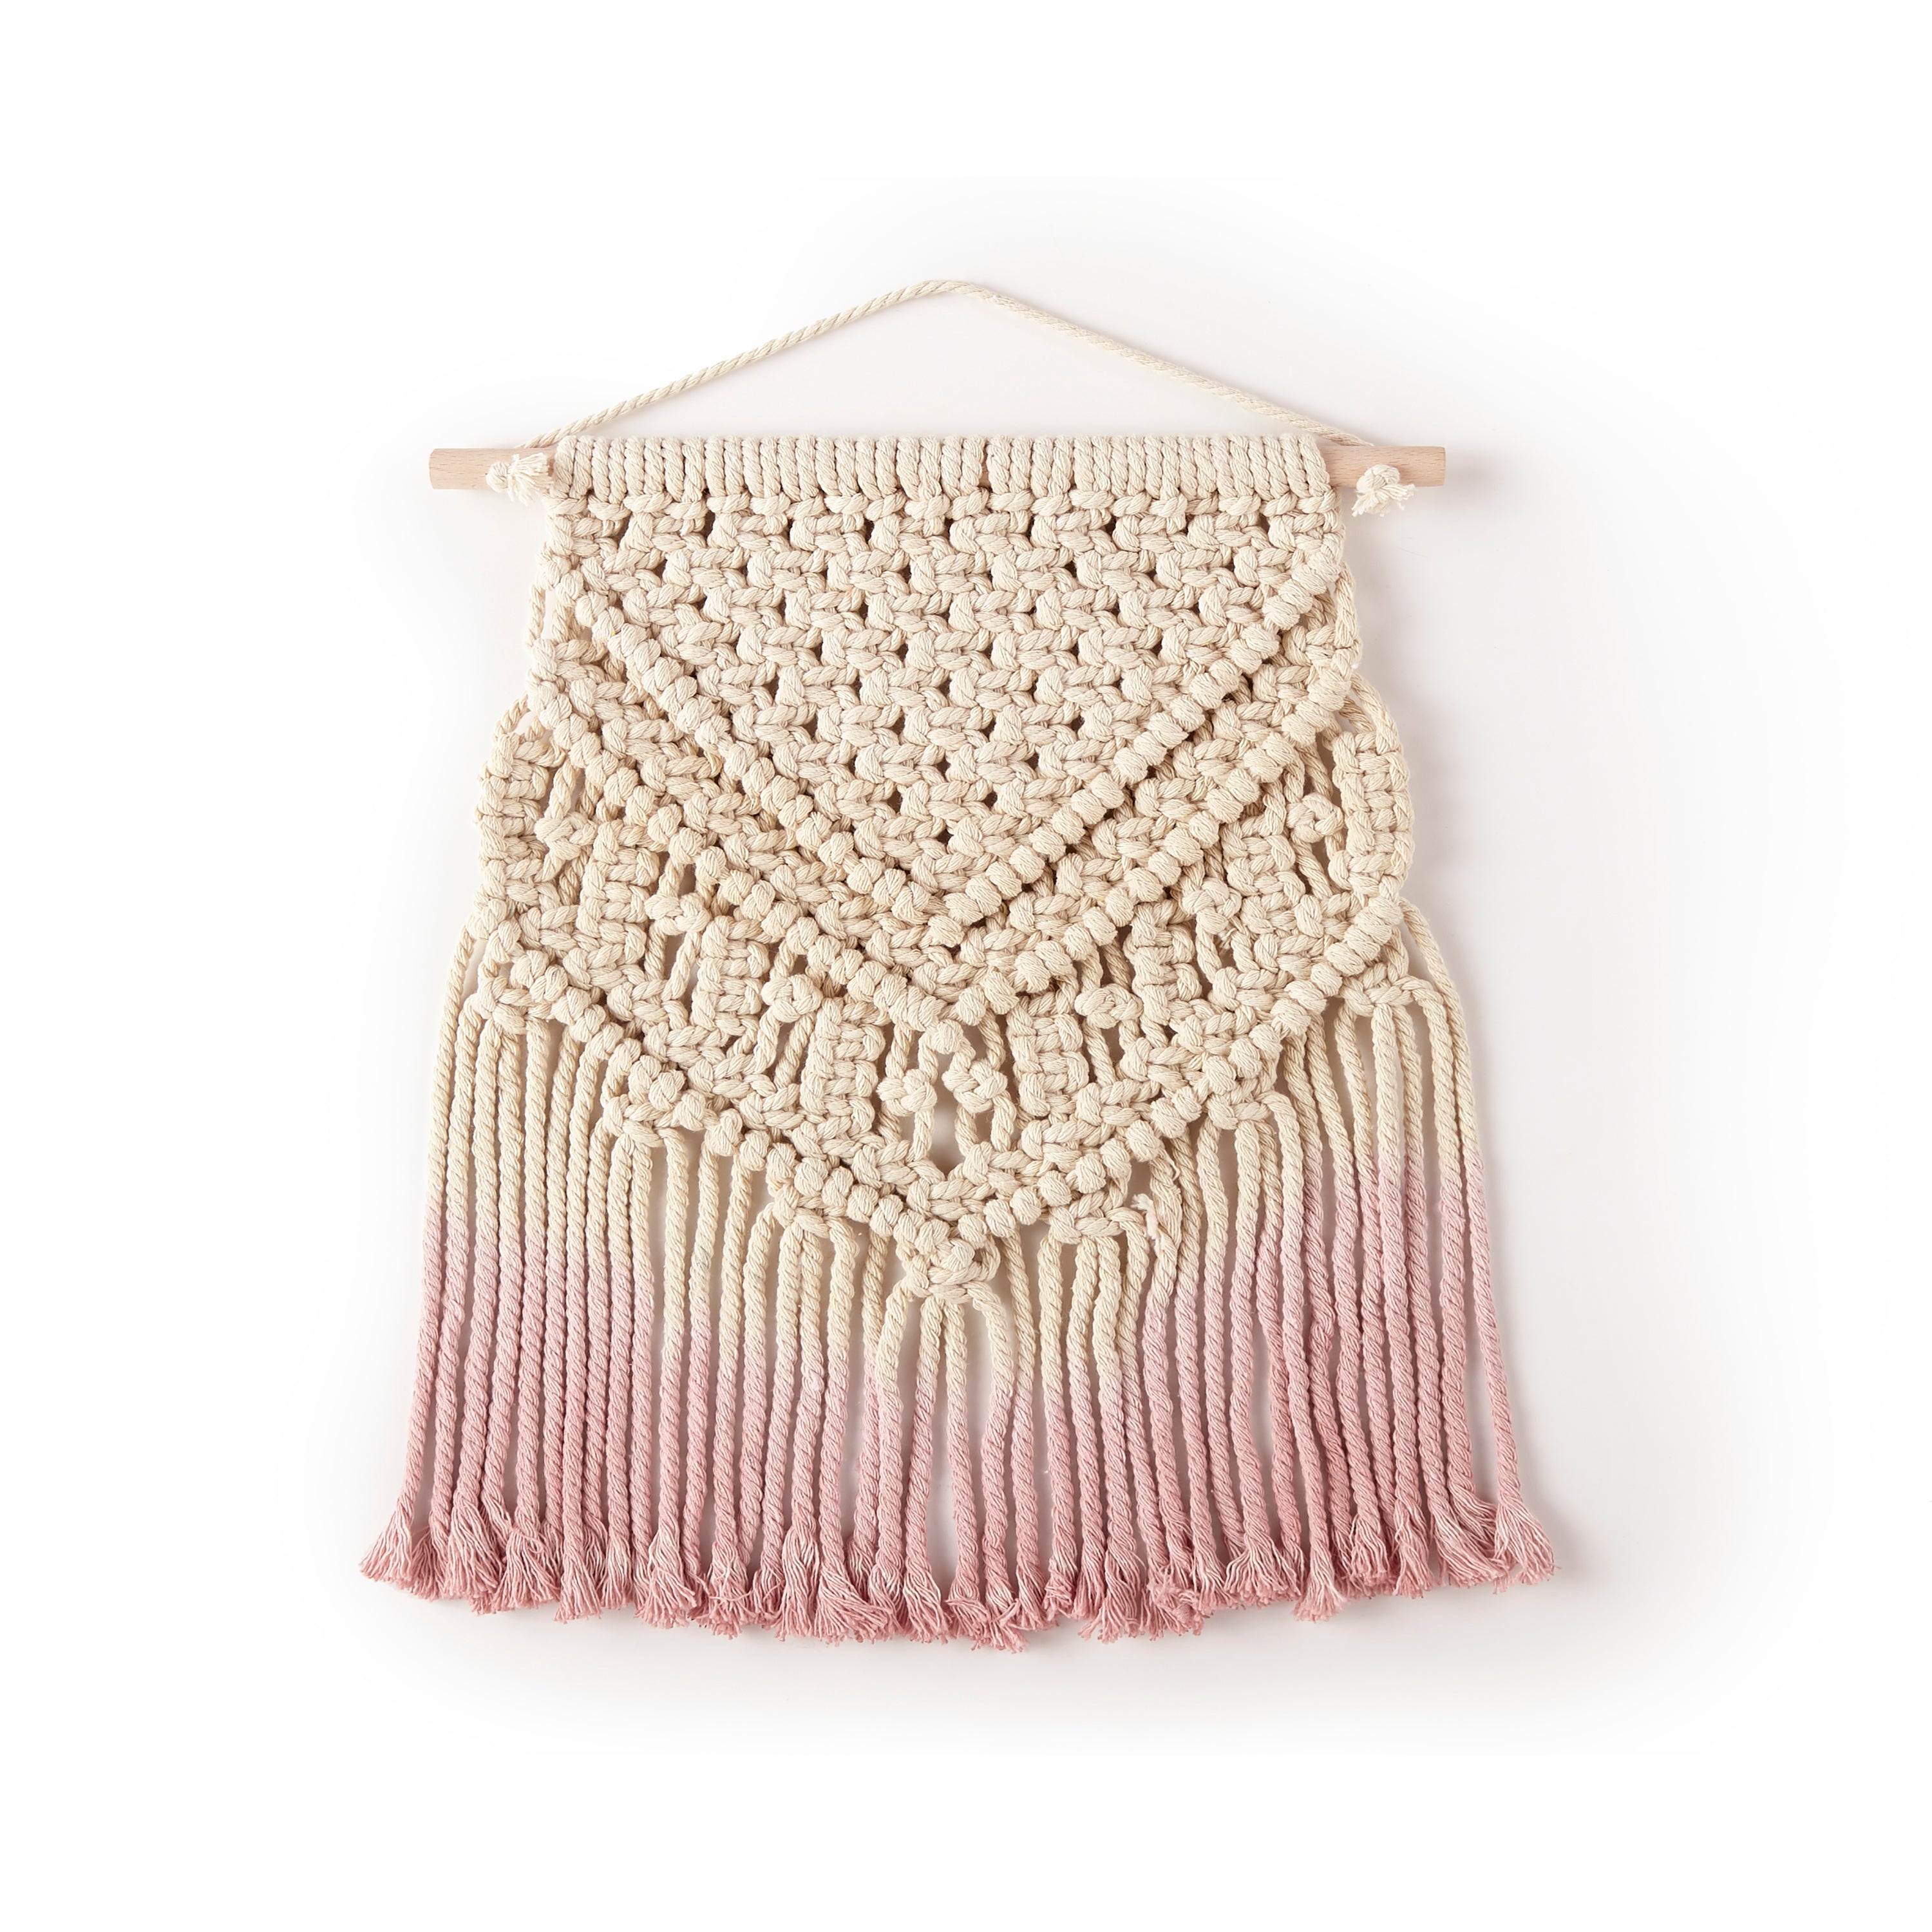 Ombre Macrame Wall Hanging